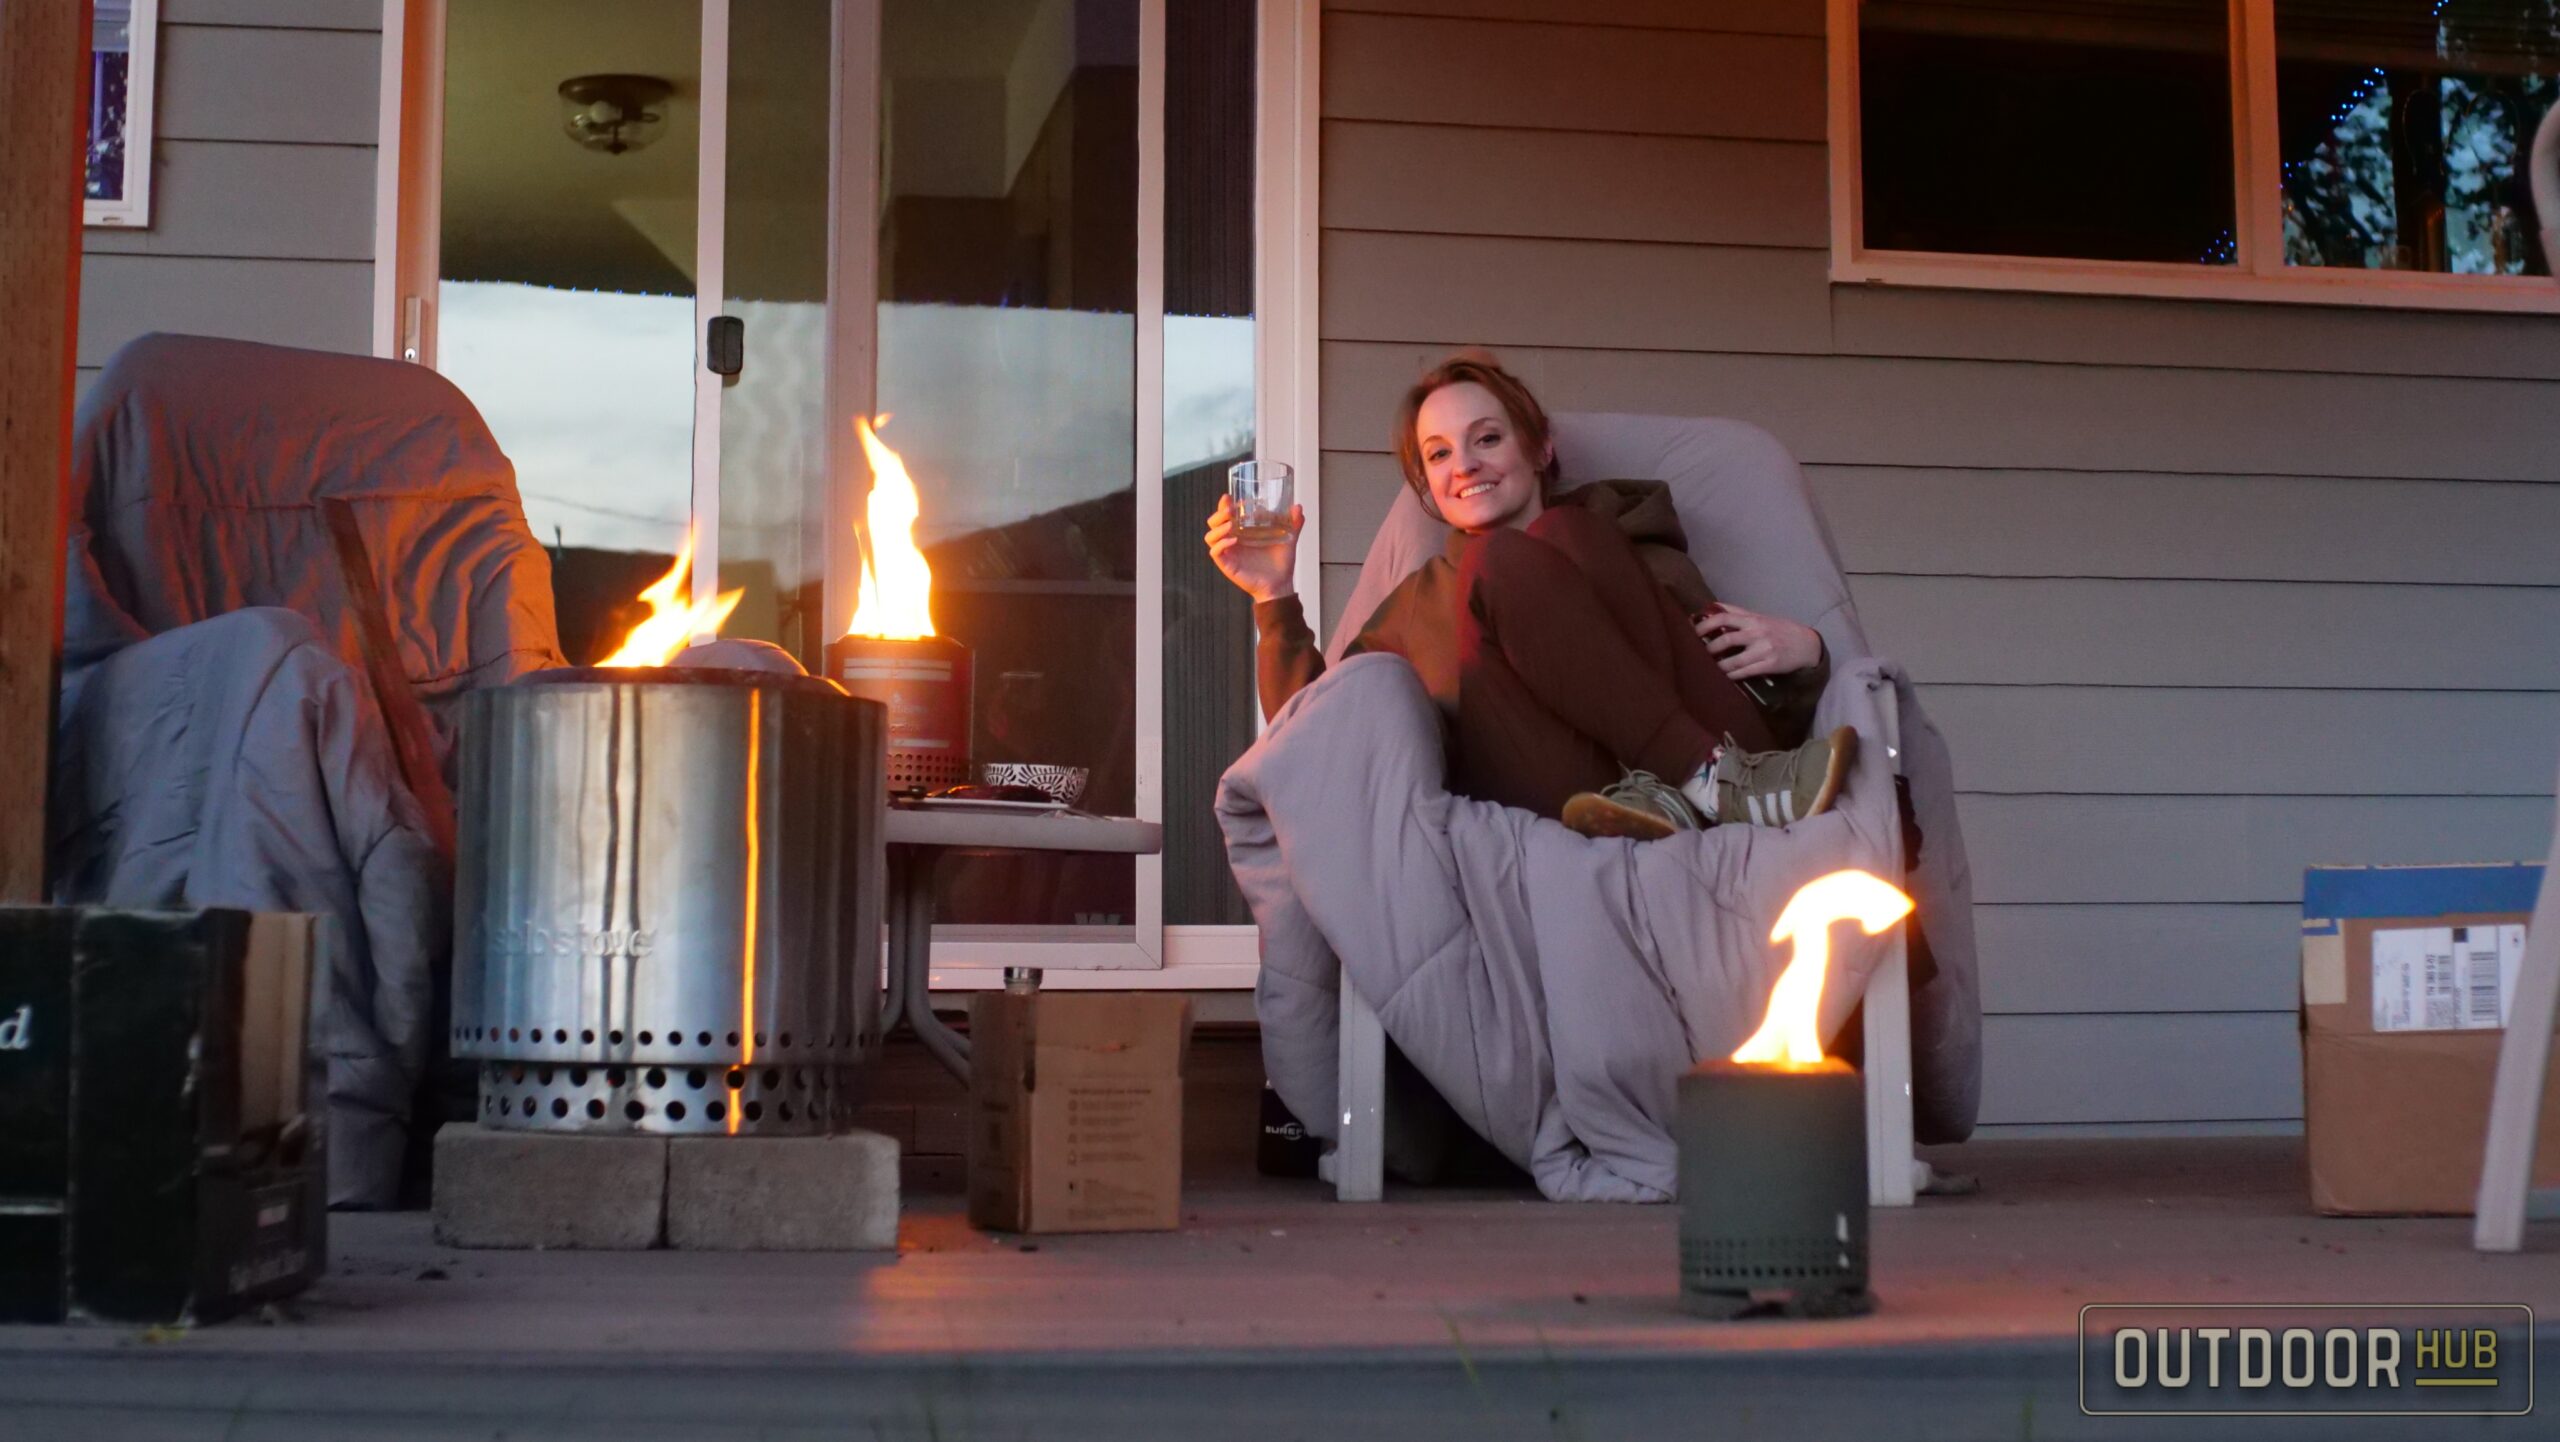 OHUB REVIEW: An Evening With WhistlePig CampStock and Solo Stove